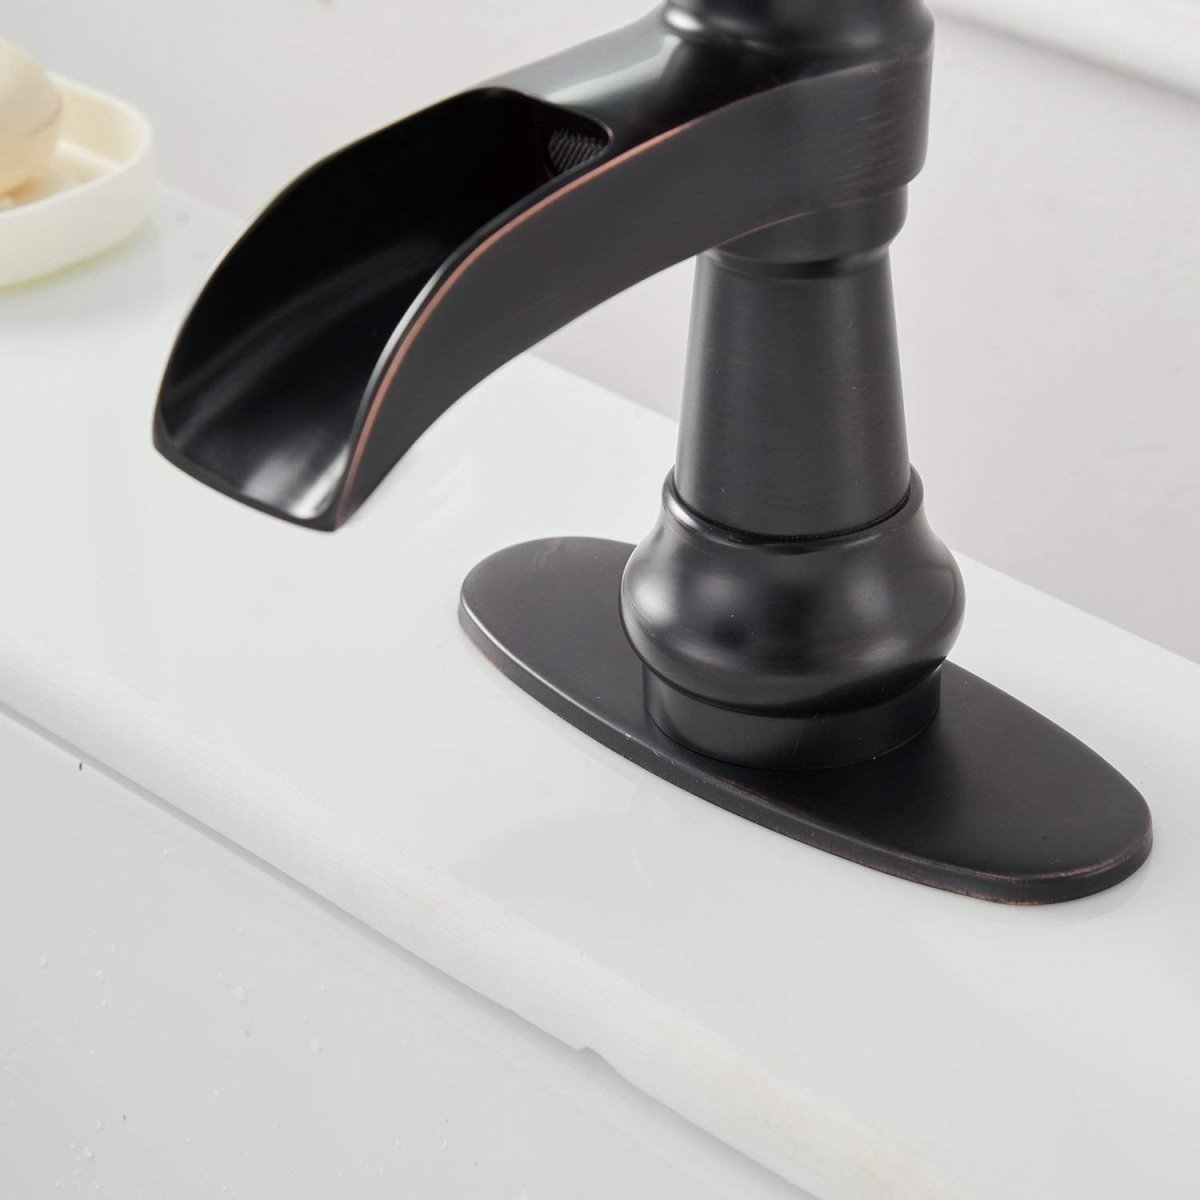 Waterfall Sing Hole Bathroom Faucet Oil Rubbed Bronze - buyfaucet.com